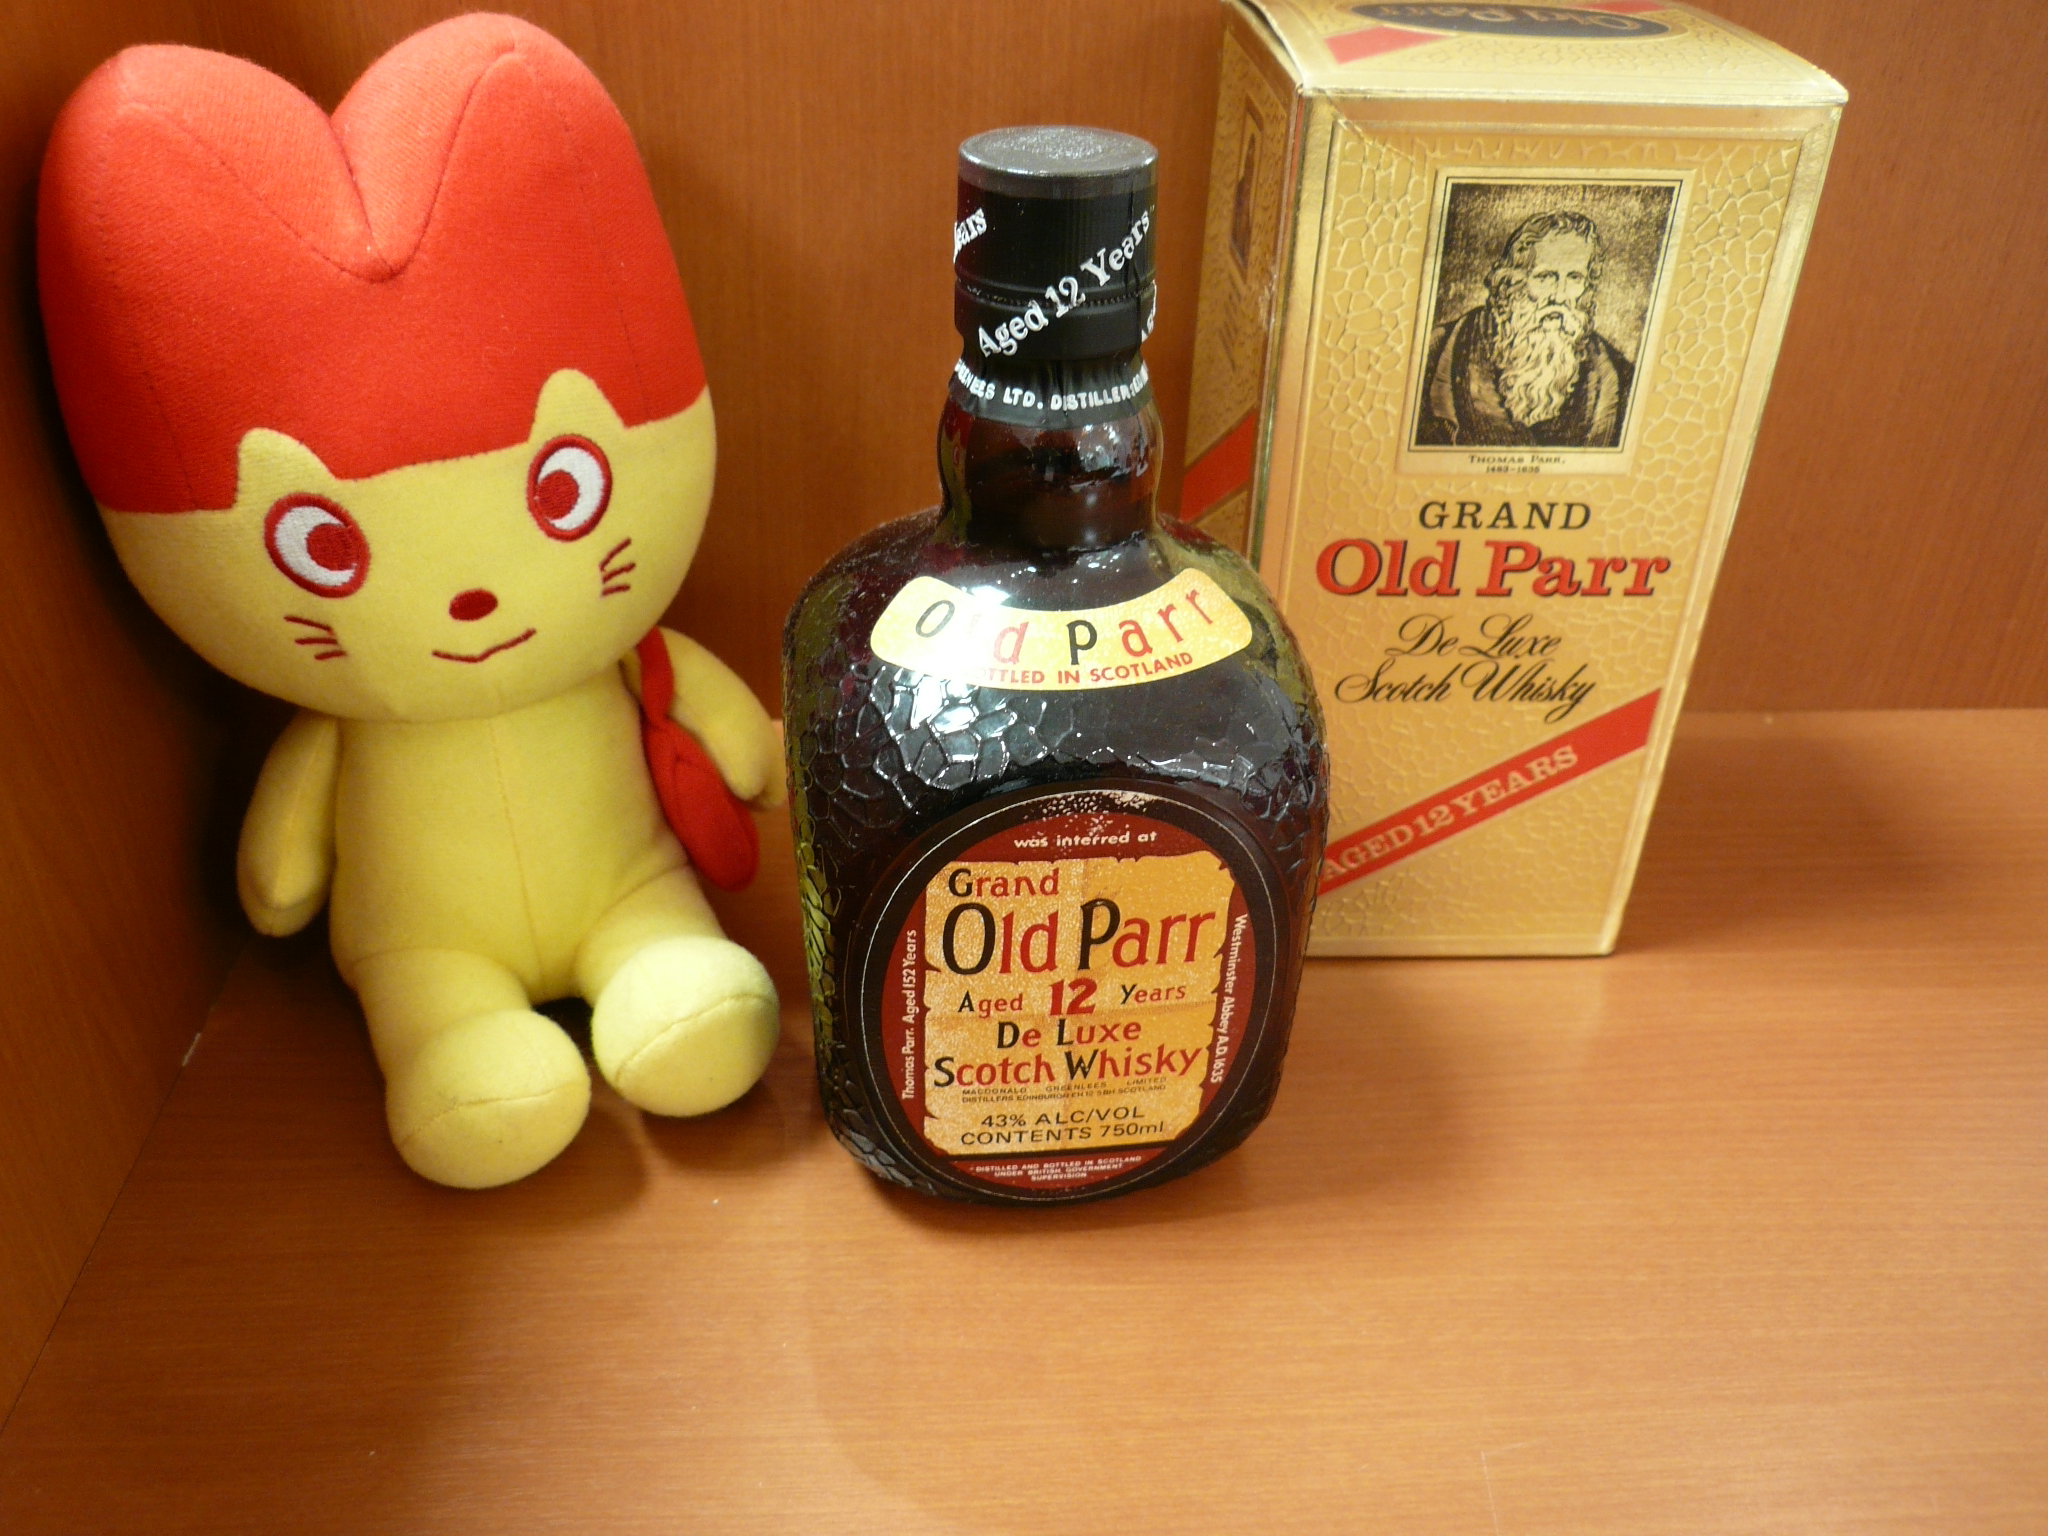 theou(ｻﾞｵｳ)ﾏｰｻ21店☆★ｳｲｽｷｰ高価買取中★☆Grand Old Parr DeLuxe AGED12YEARS 760ml